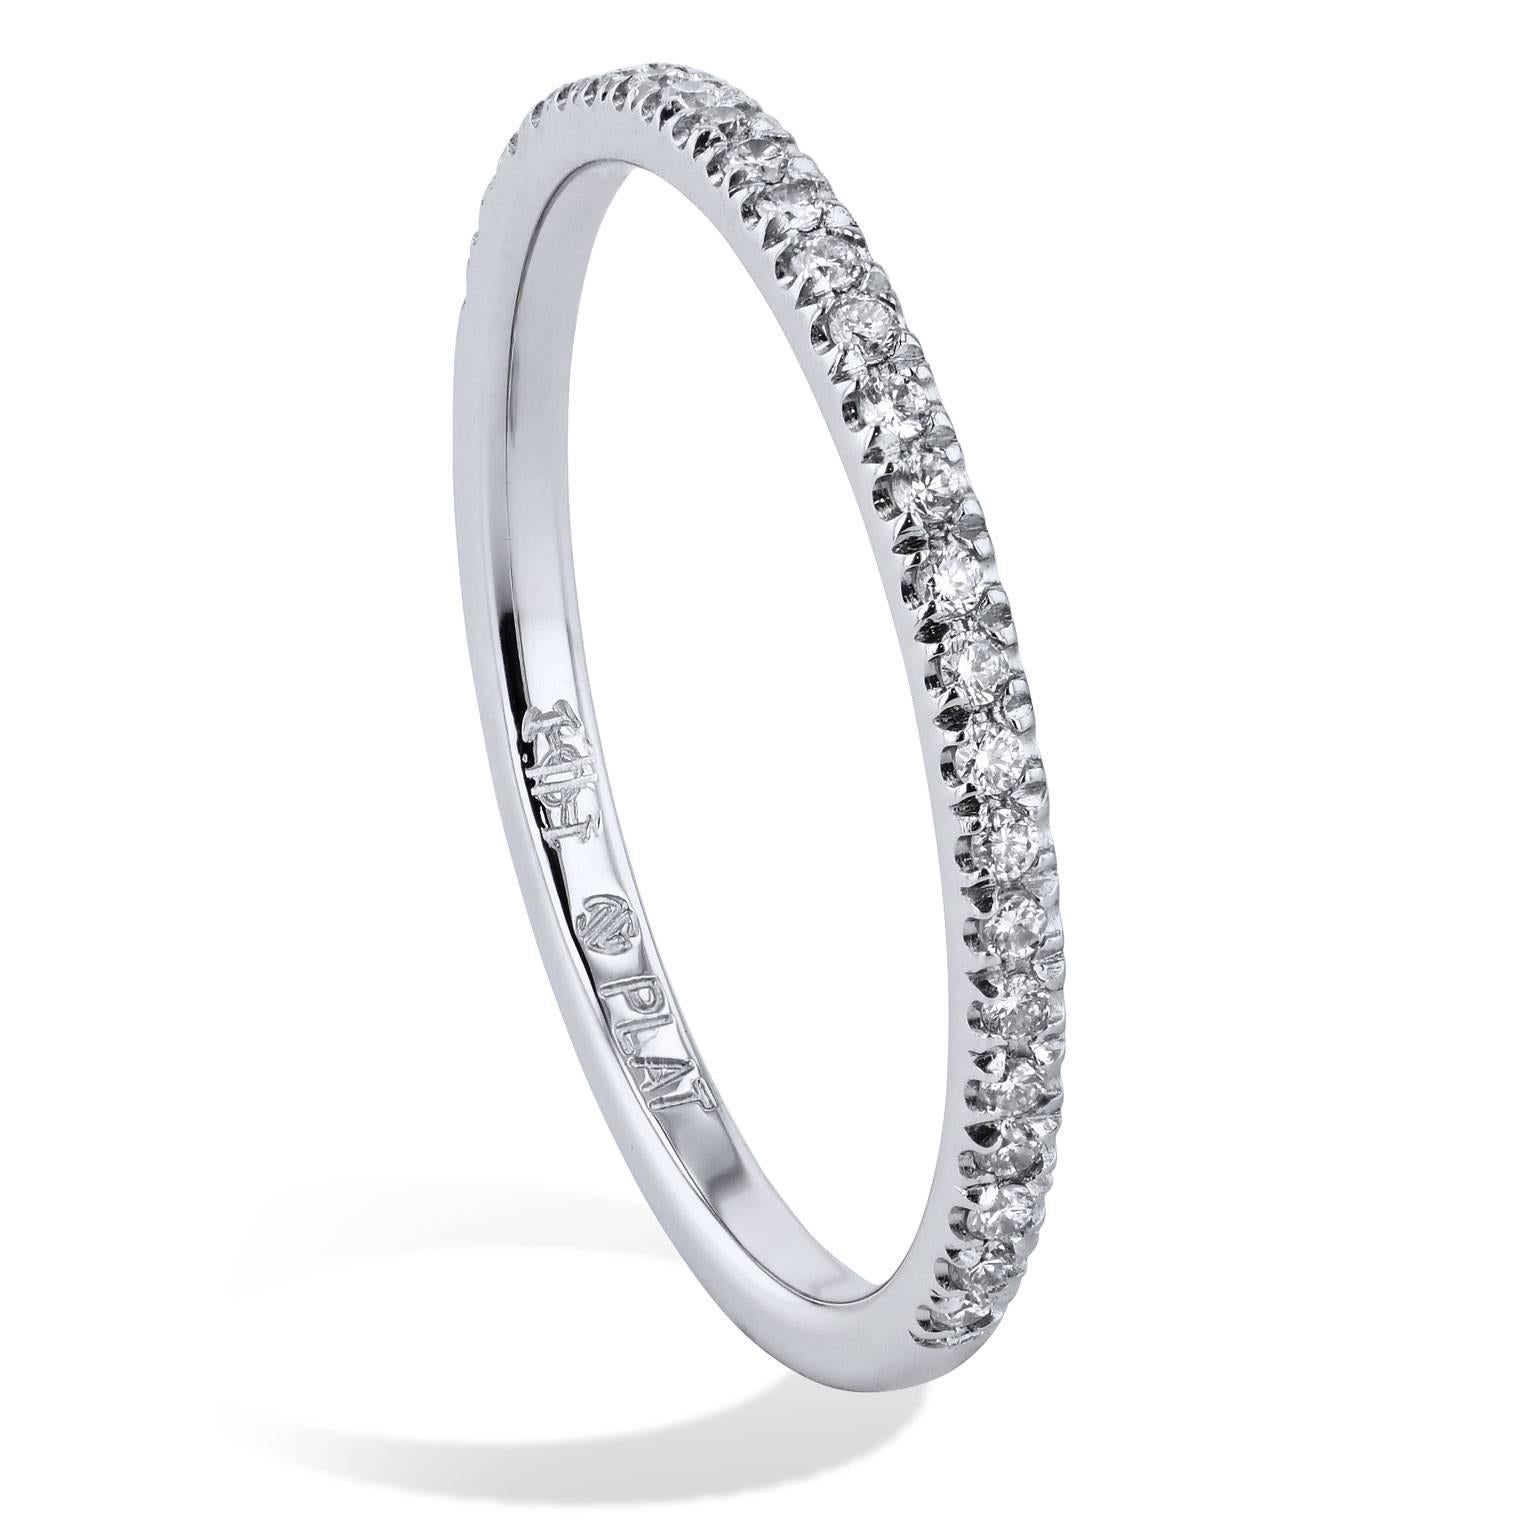 Imagine twenty-seven pave-set round brilliant cut diamonds encircling your finger in this handmade platinum band ring. This charming half-diamond band features a total weight of 0.13 carat with milgrain work on a 1.50 millimeter thick band